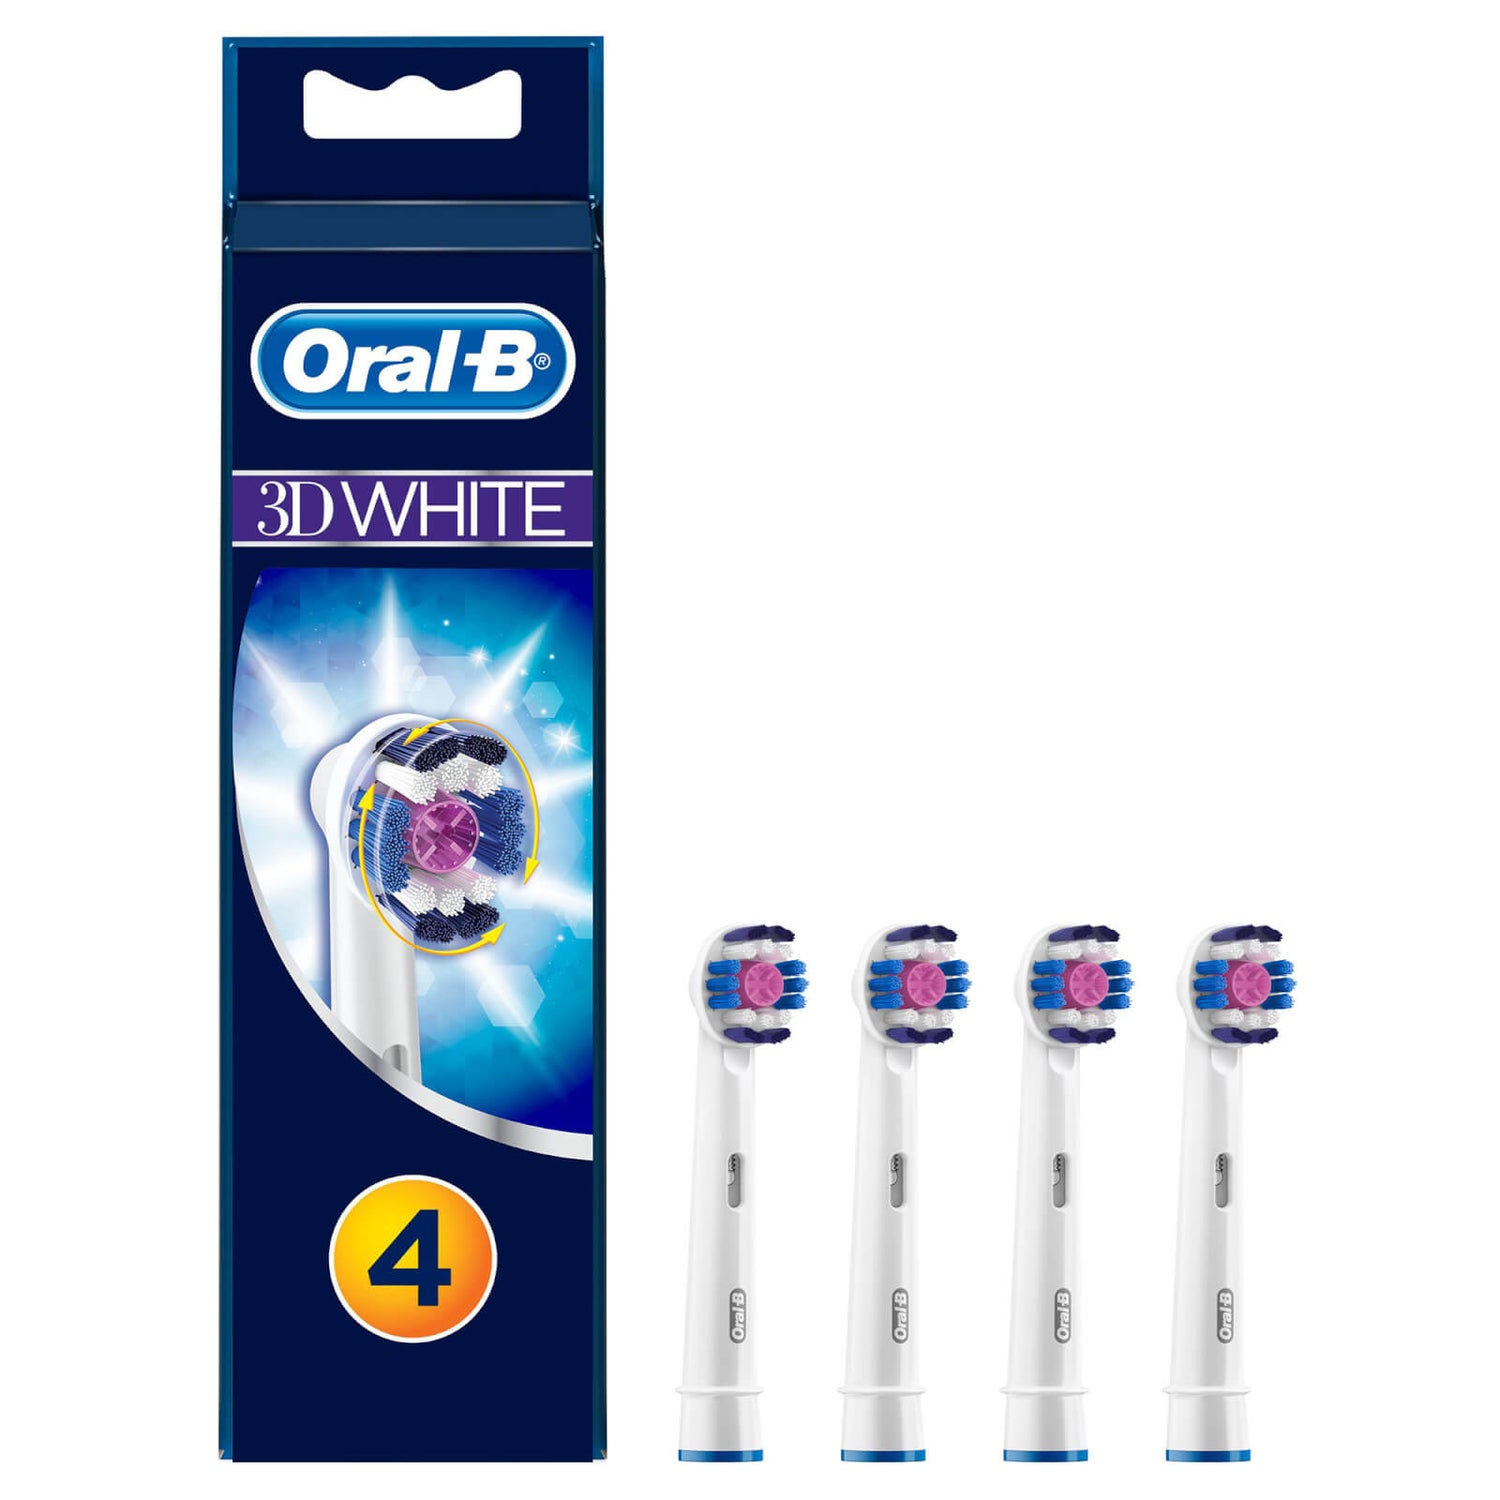 Oral B 3D White Toothbrush Head Refills (Pack of 4)